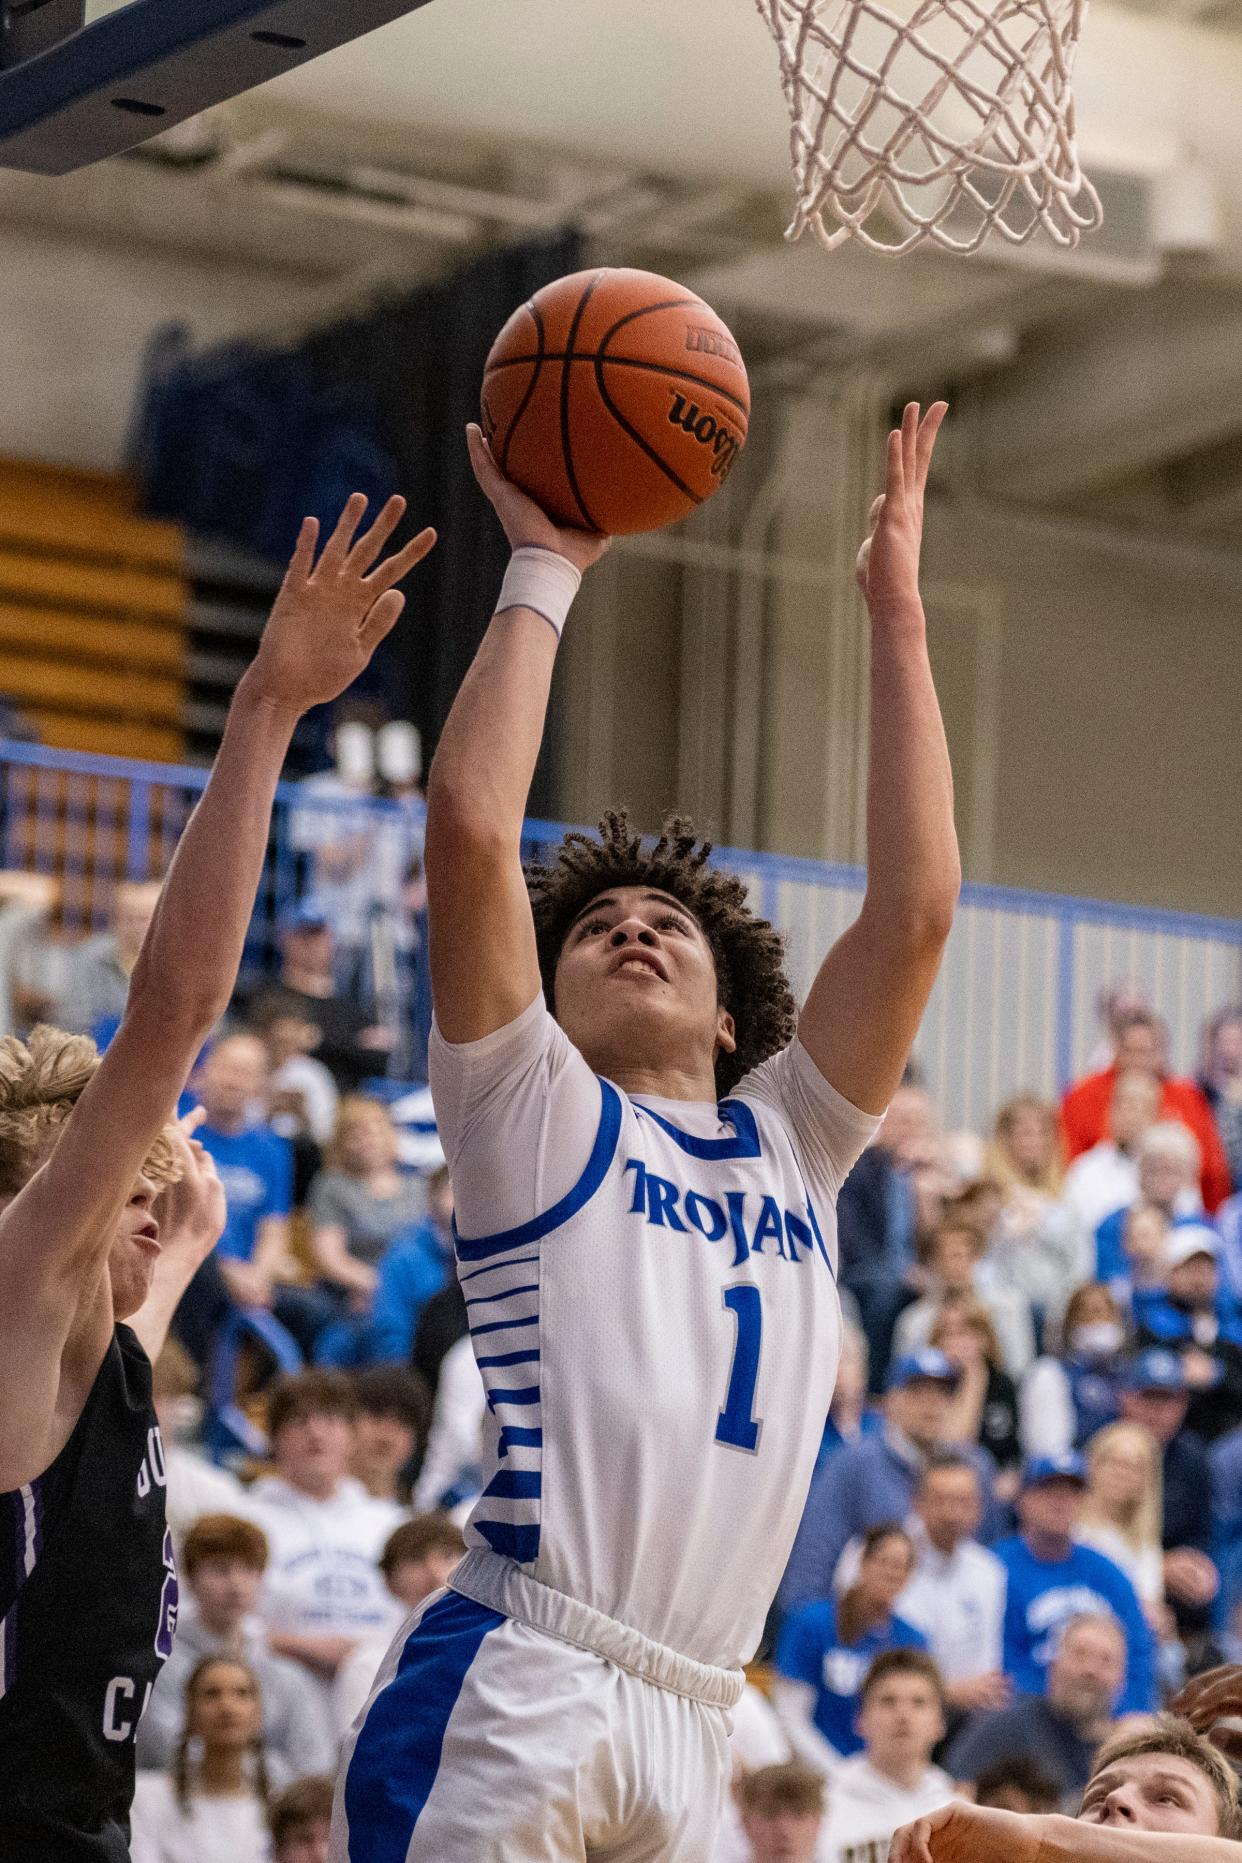 Indianapolis Bishop Chatard freshman Ethan Roseman (1) shoots during the second half of an IHSAA Sectional Basketball championship game against Guerin Catholic High School, Monday, March 6, 2023, at Indianapolis Shortridge High School. Guerin Catholic won 53-41.